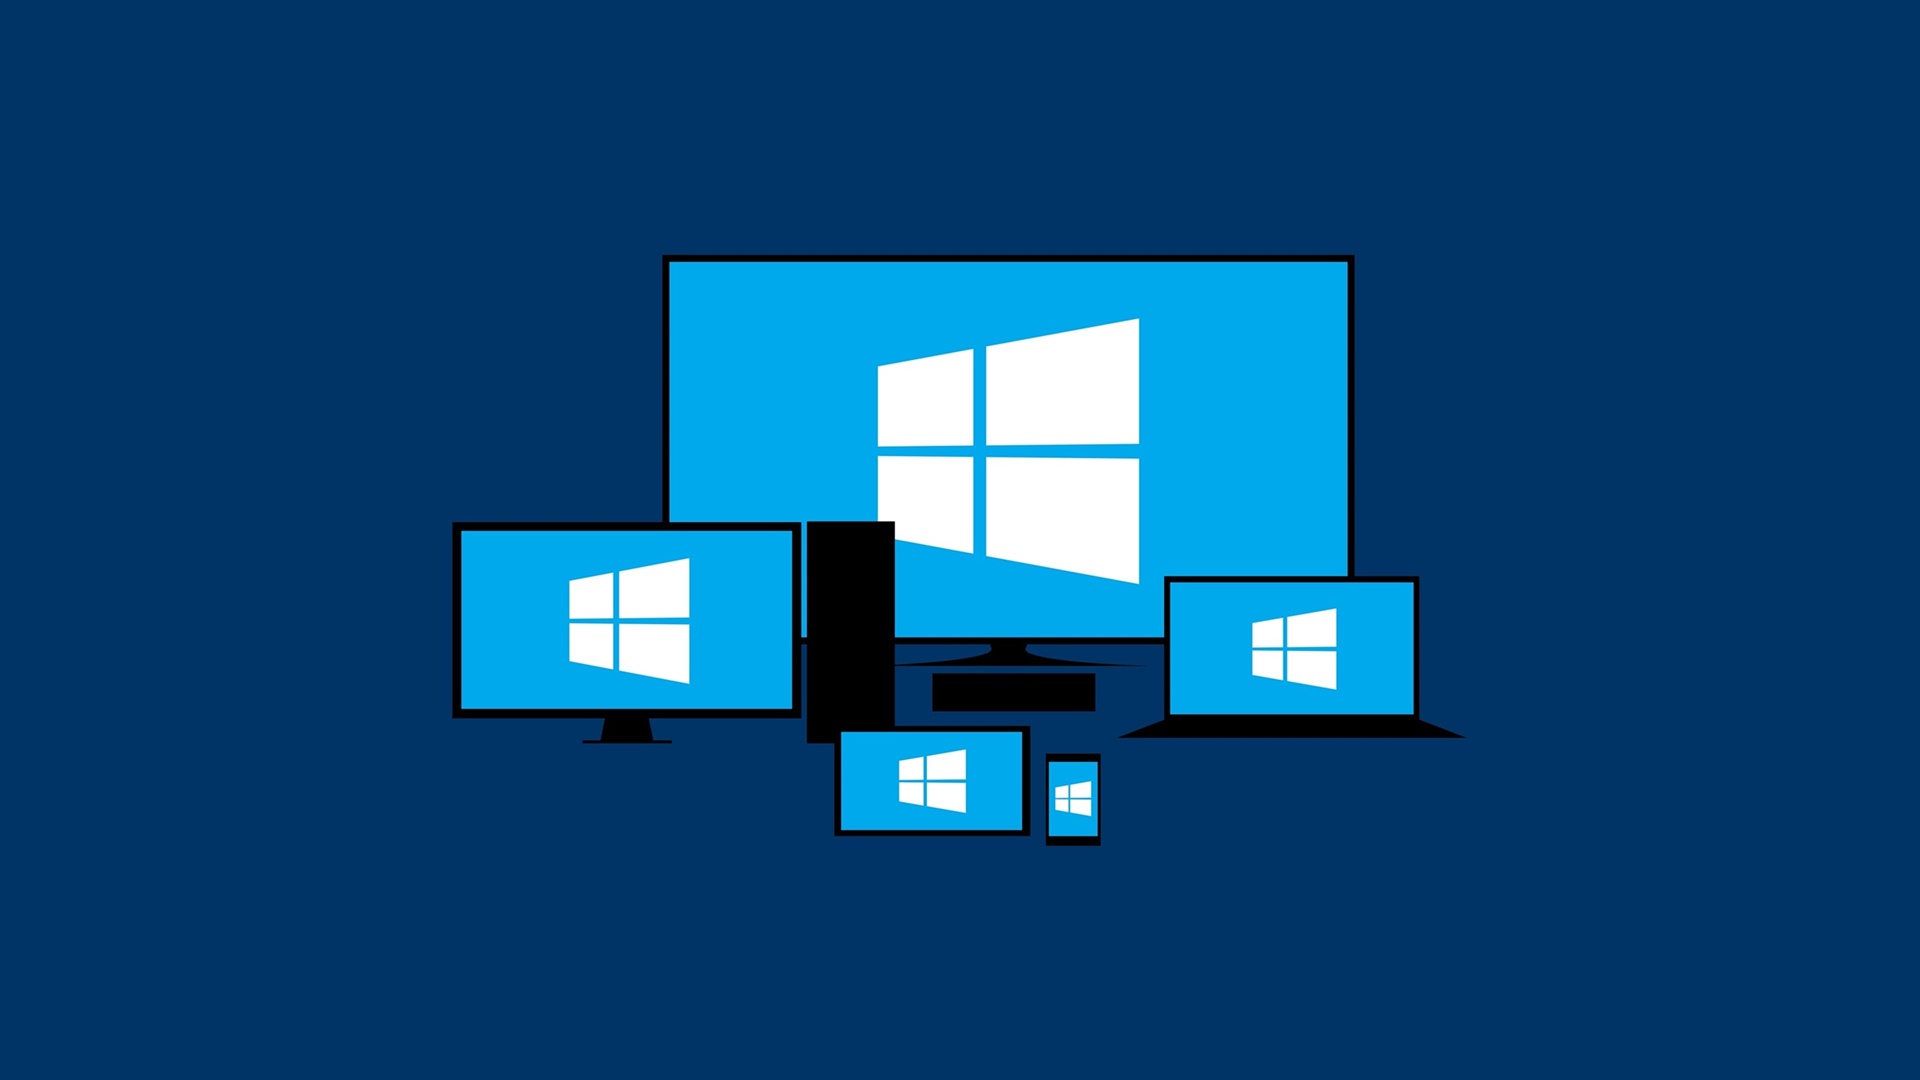 Windows 10 Professional Wallpapers